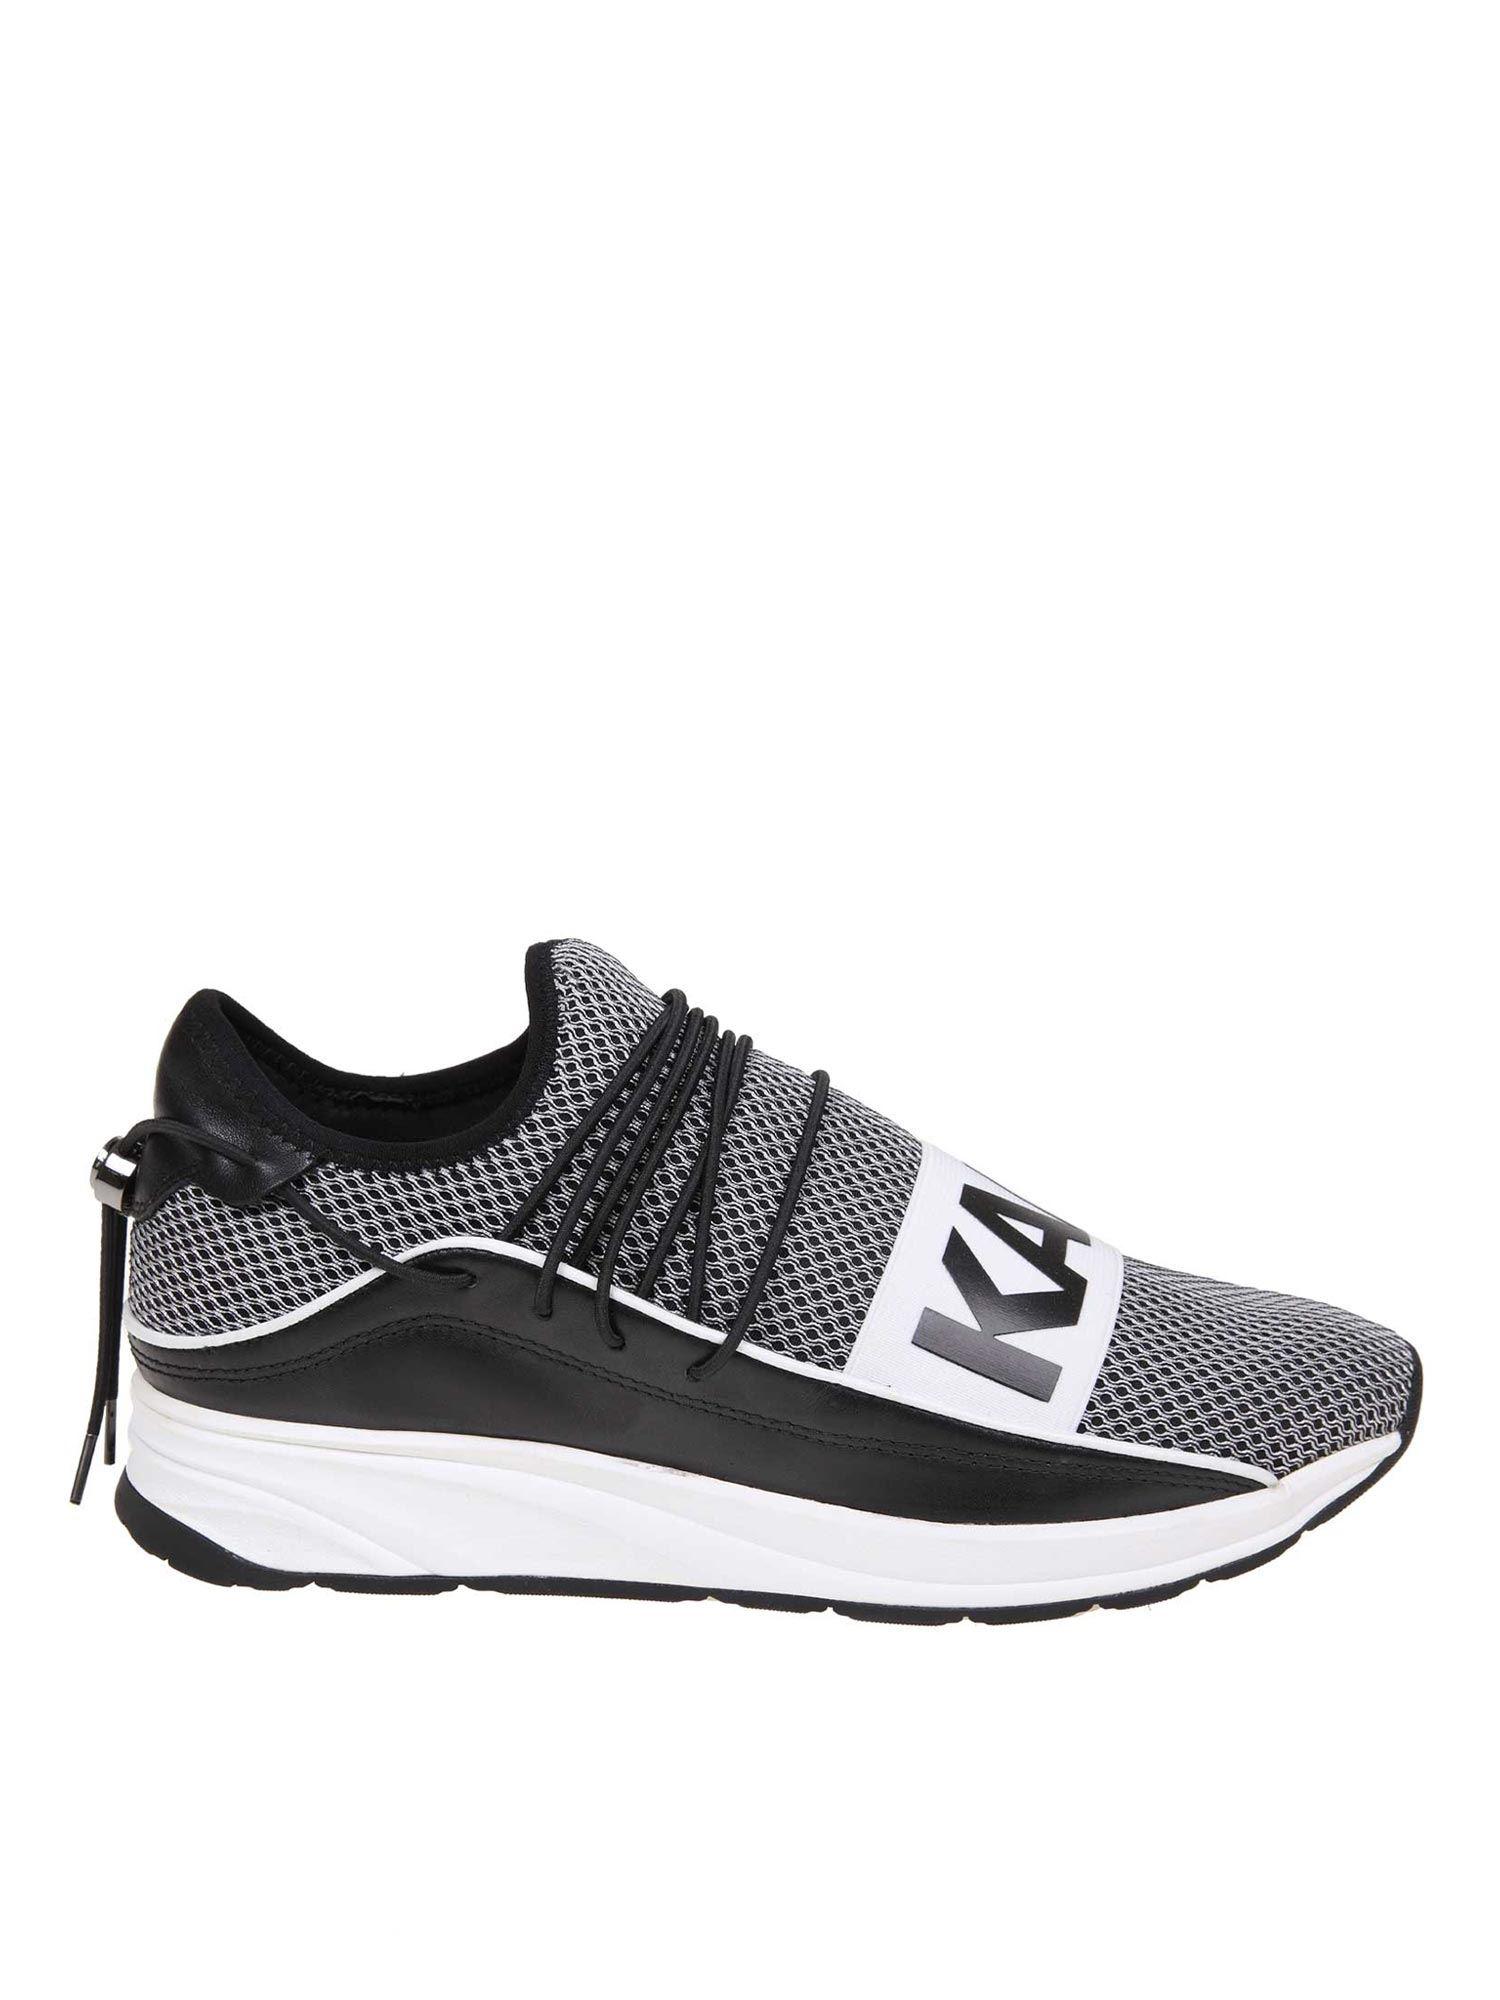 Karl Lagerfeld Leather Black Sneakers With Karl Detail for Men - Lyst